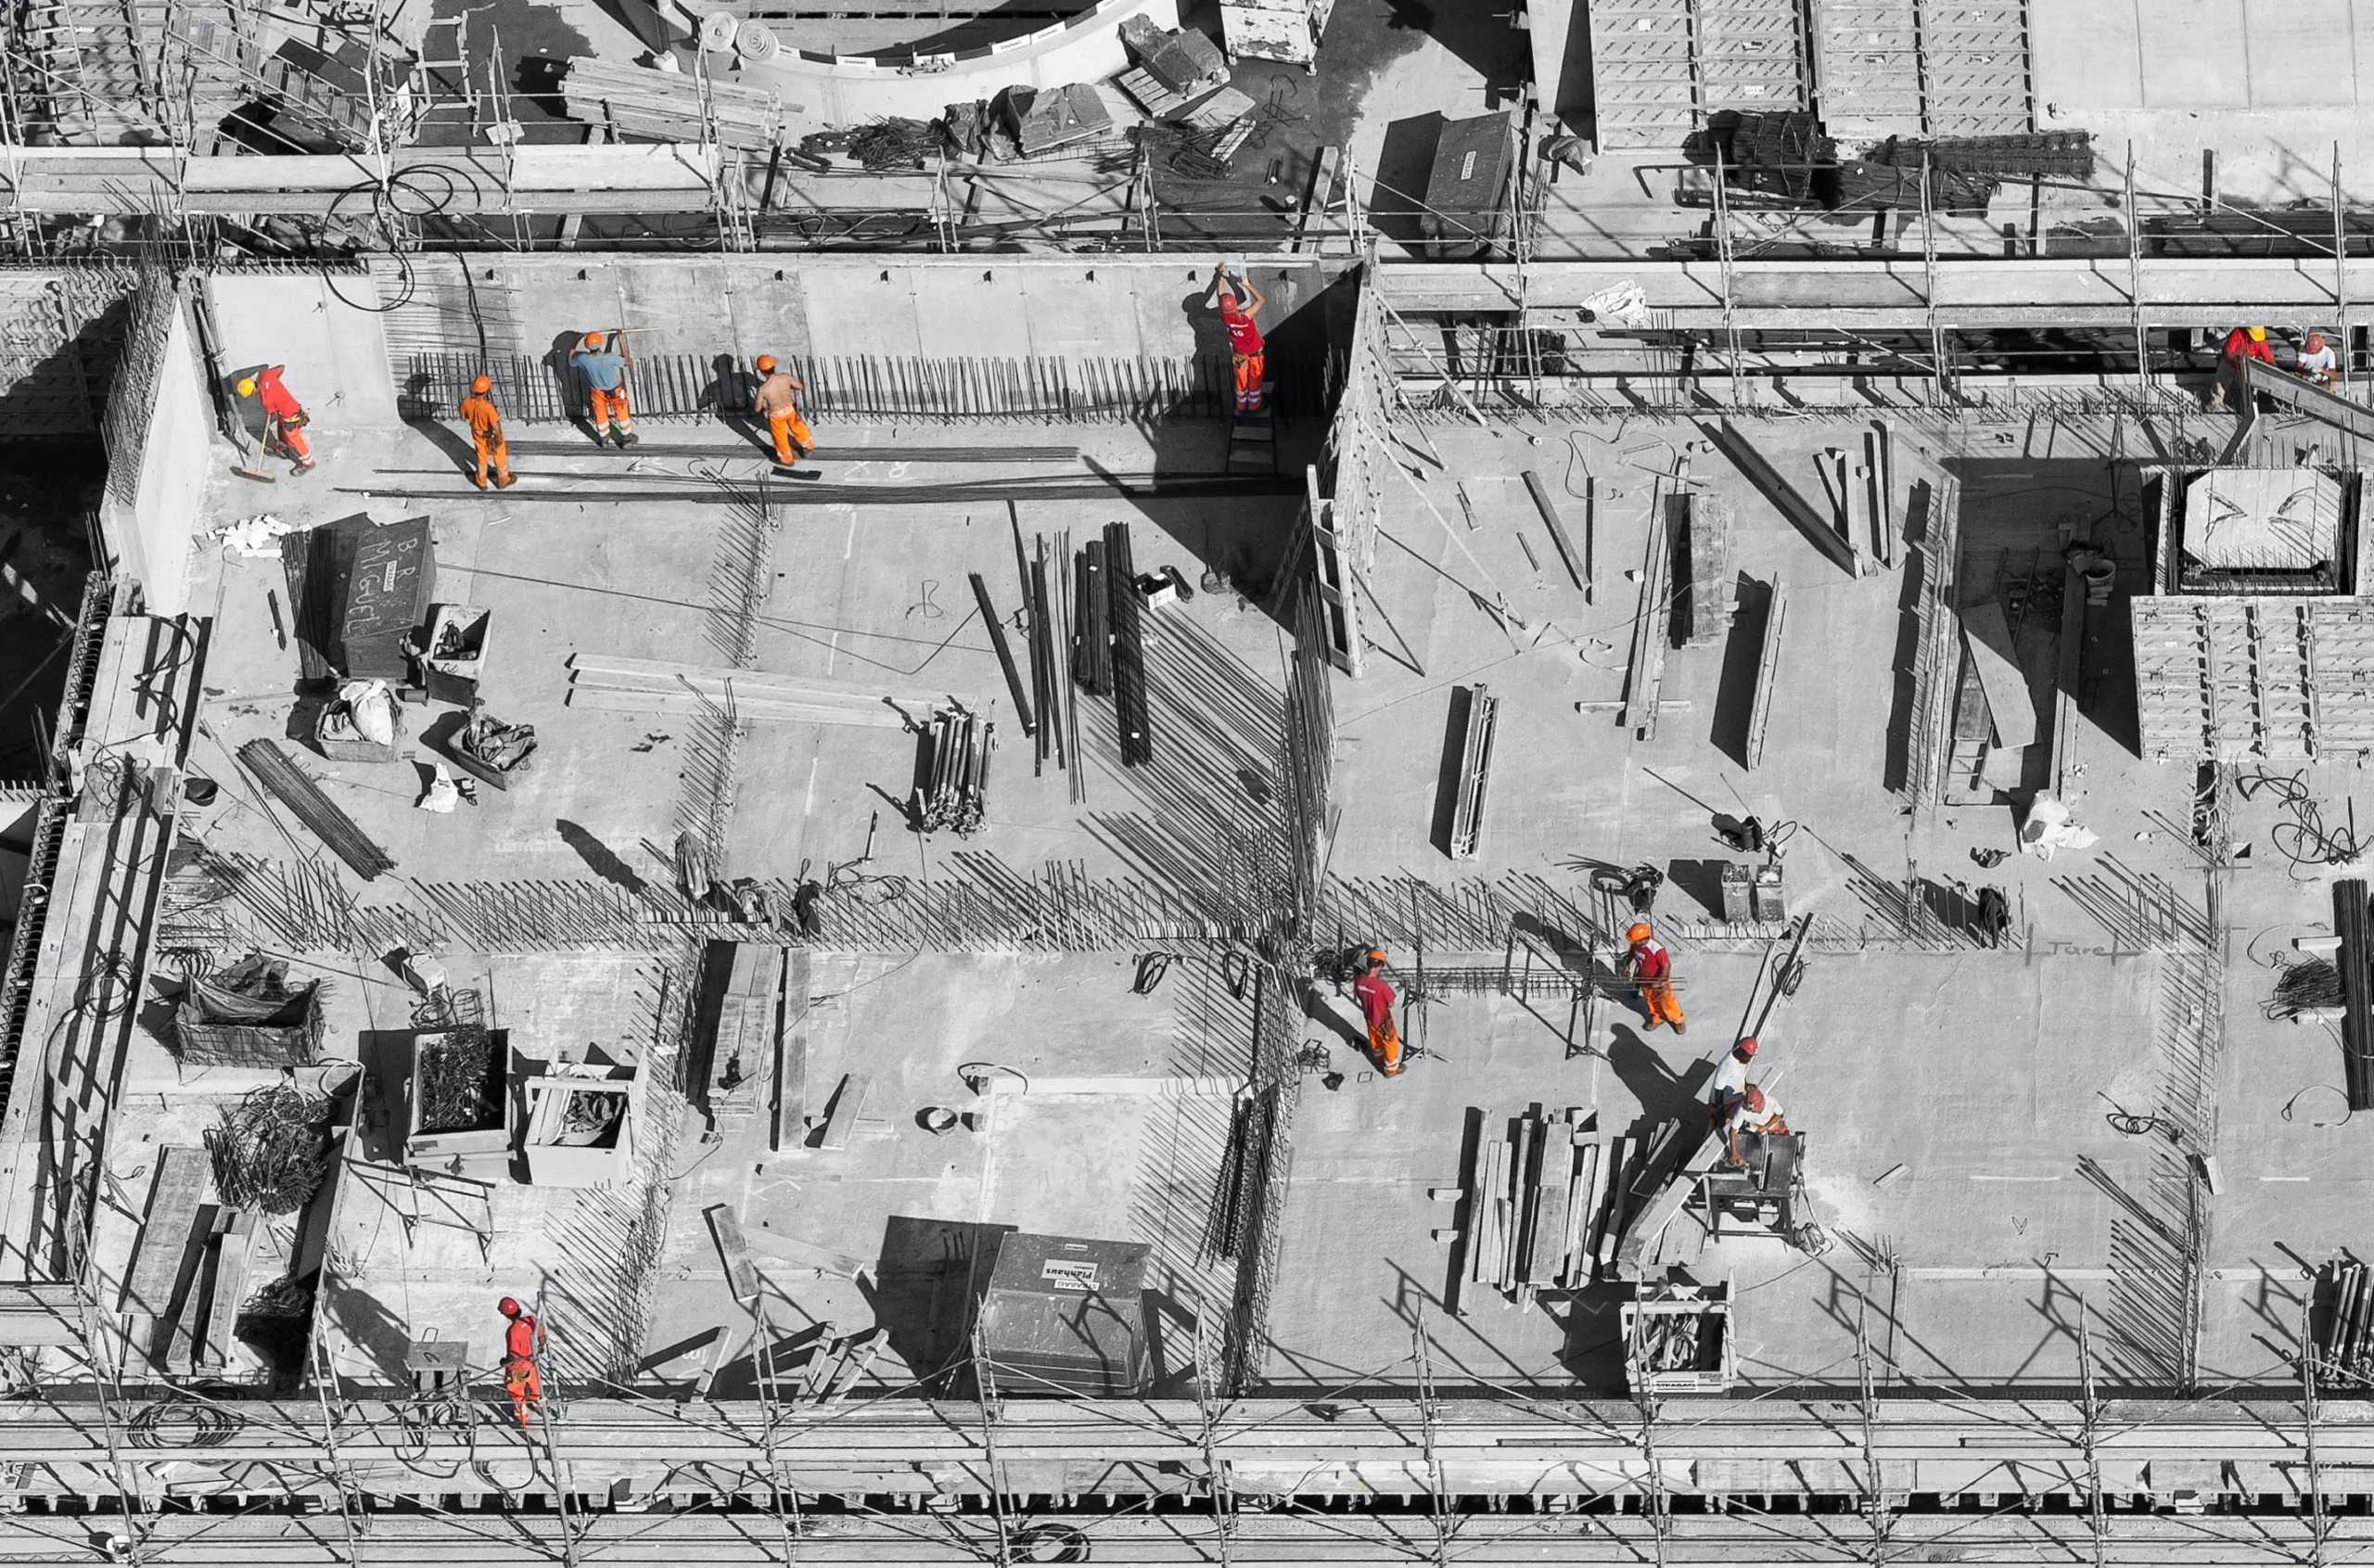 Work site safety monitored by jobsite camera